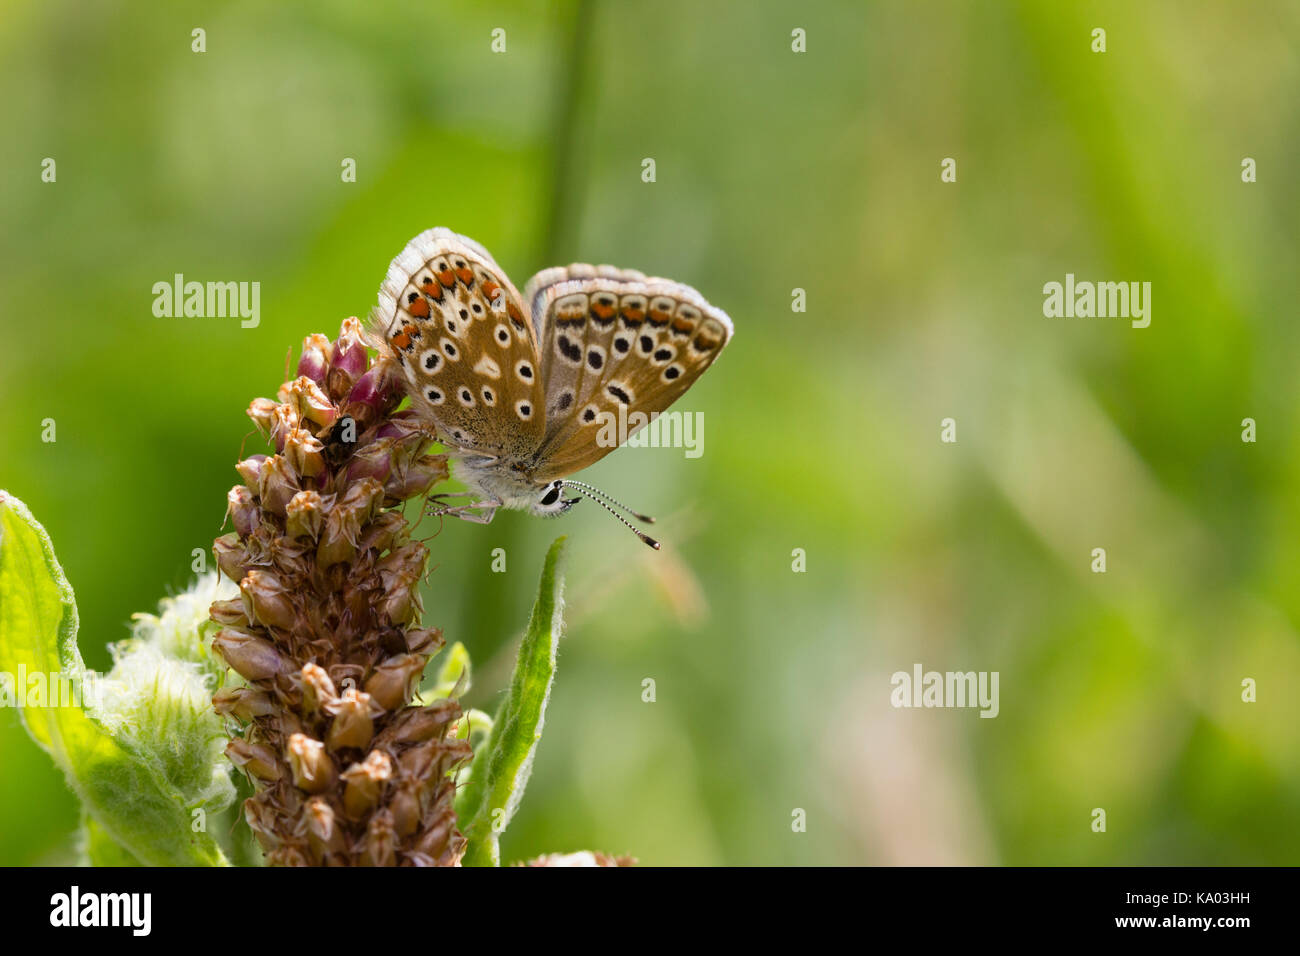 Female common blue butterfly, Polyommatus icarus, in typical head down resting position Stock Photo